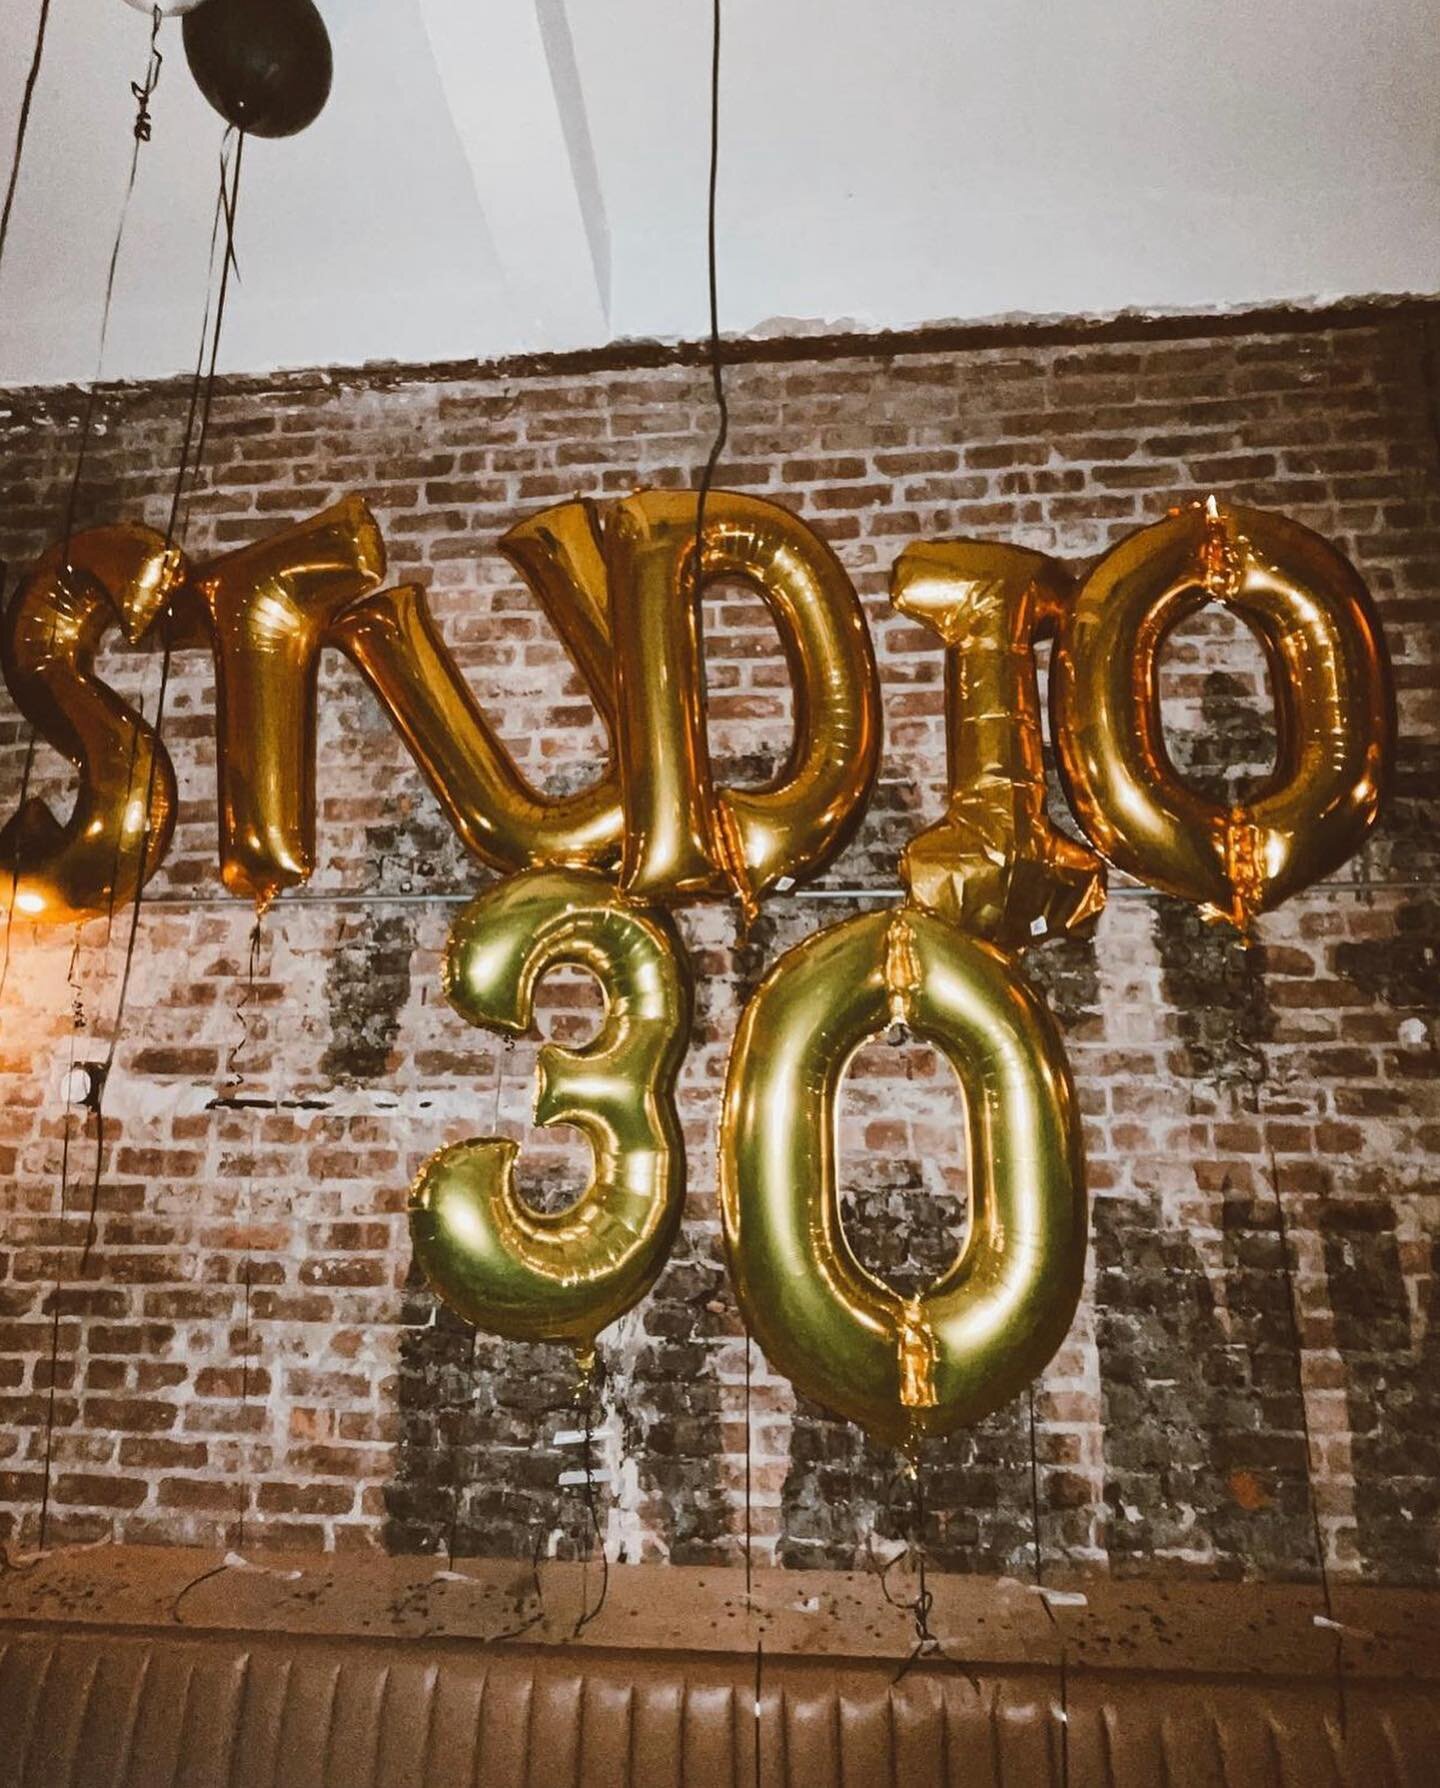 If it&rsquo;s a party, we&rsquo;re about it 🎉 🍾 We have two speakeasy private rooms perfect for any and all events (birthdays!!!). Private bar, disco balls, and you can control the music! Available for groups 60-150. 

Link in bio to reserve.